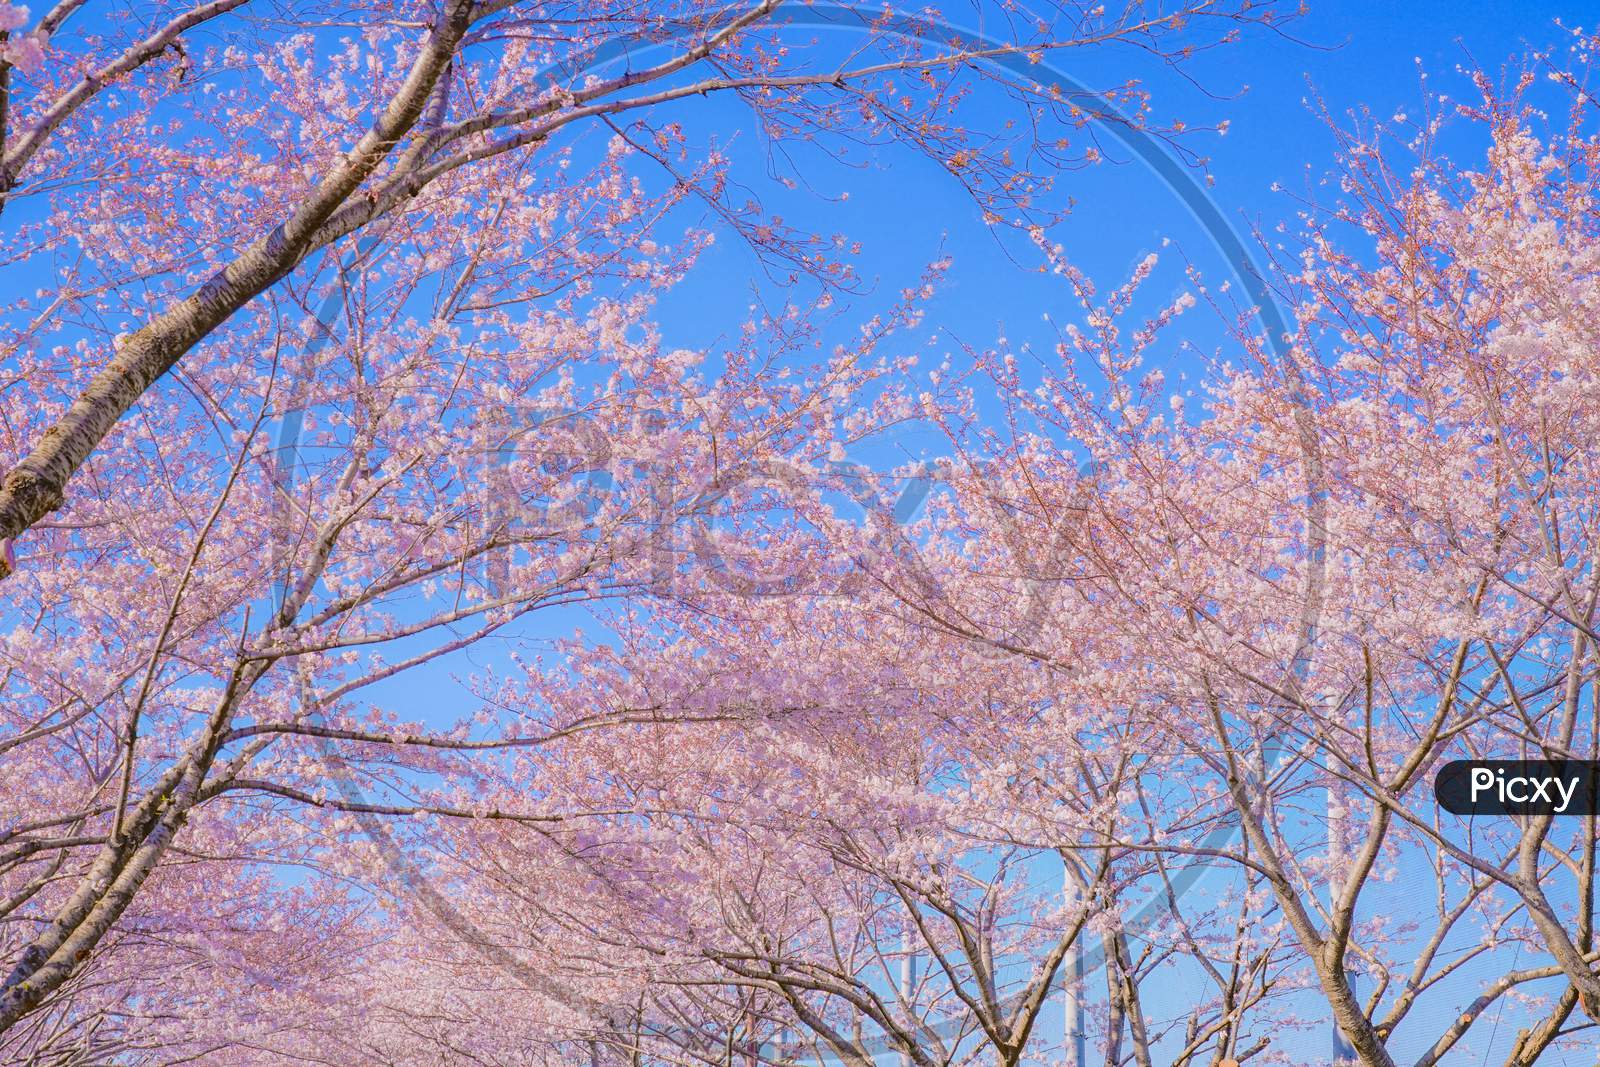 Full Bloom Of The Cherry Tree And Sunny Blue Sky (Chofu Airport)